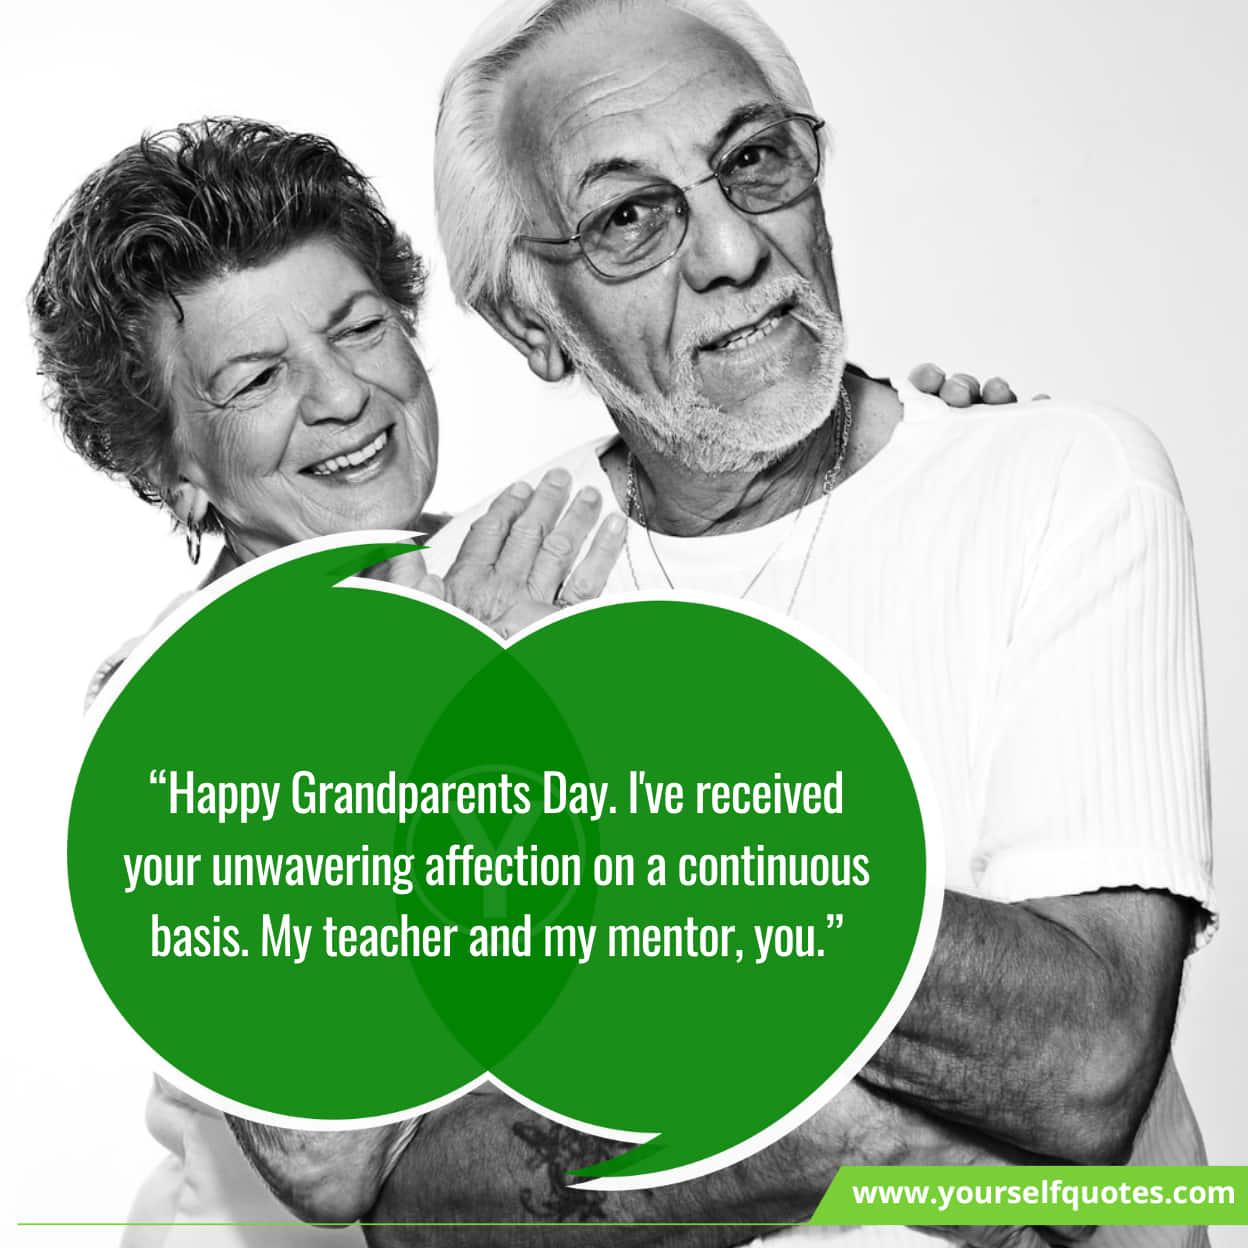 Heart-Warming Happy Grandparents Day Wishes Messages